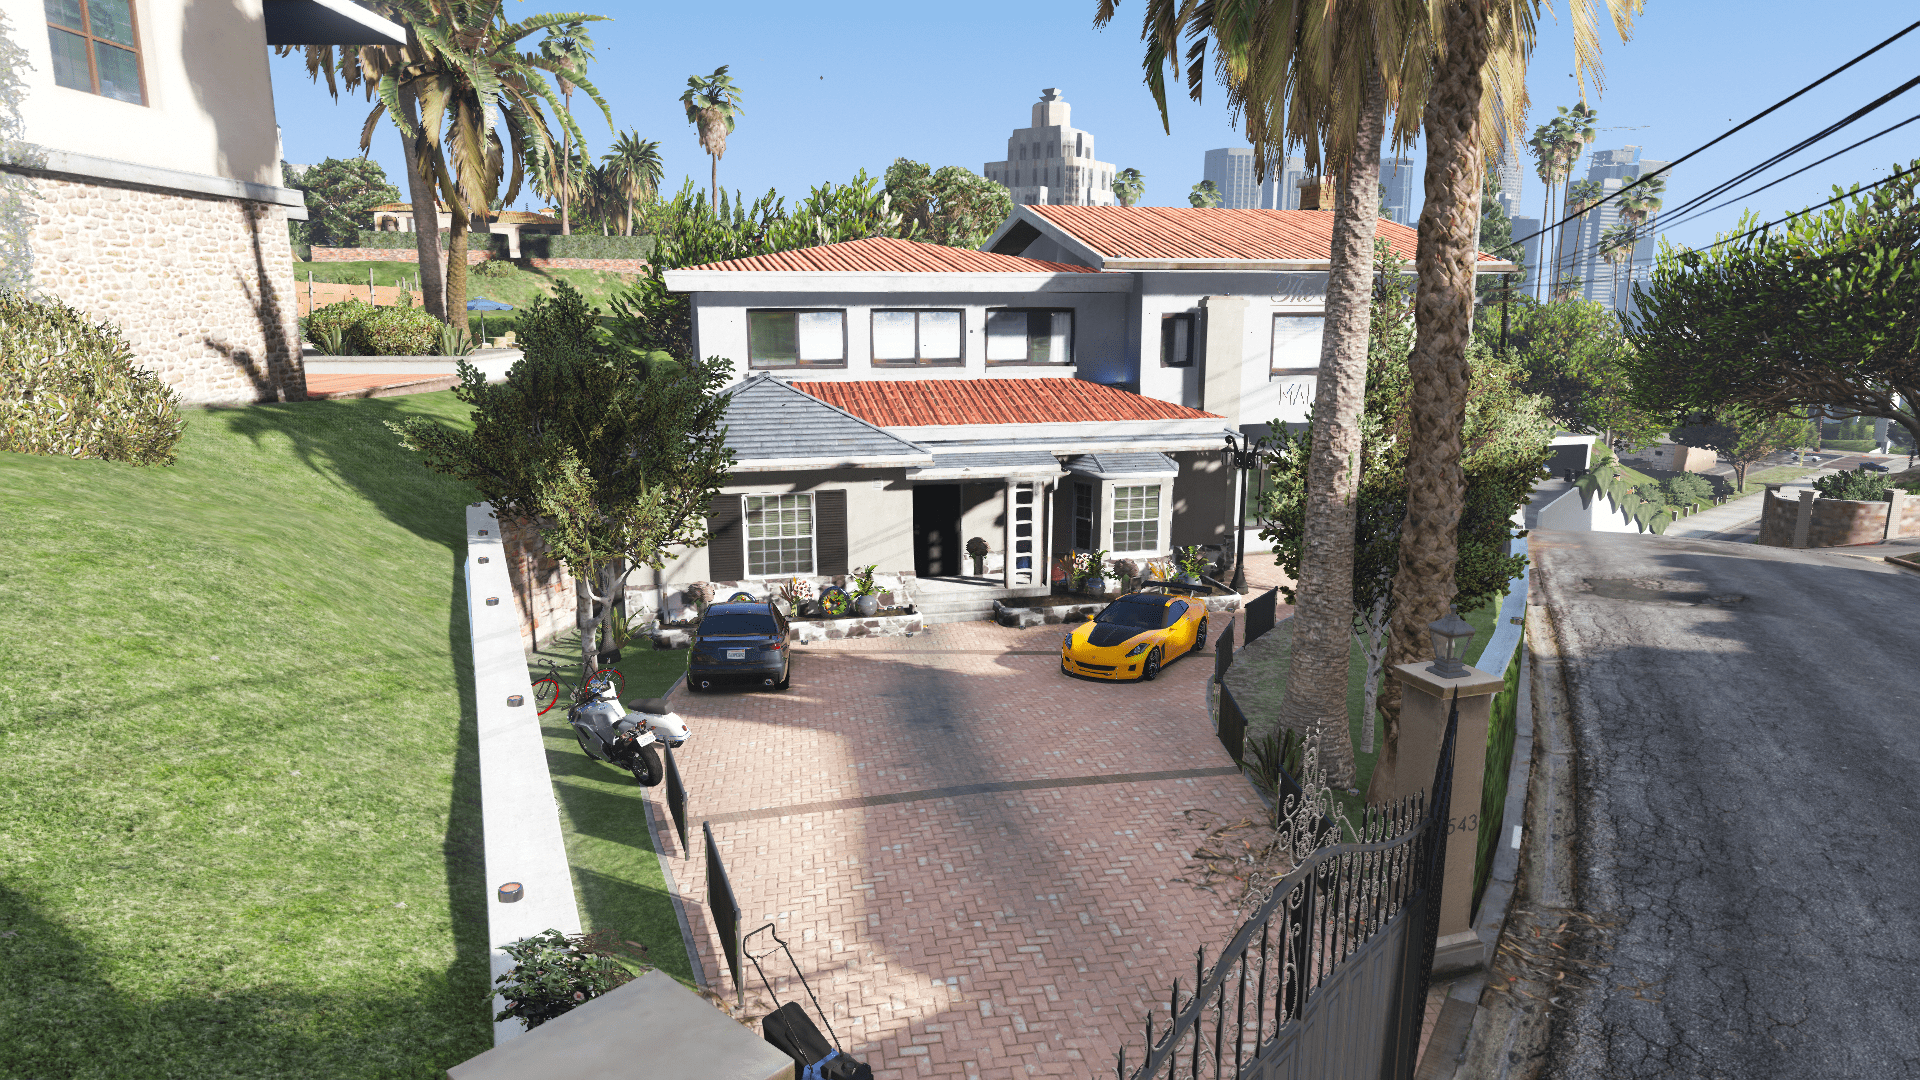 Houses that you can buy in gta 5 фото 84